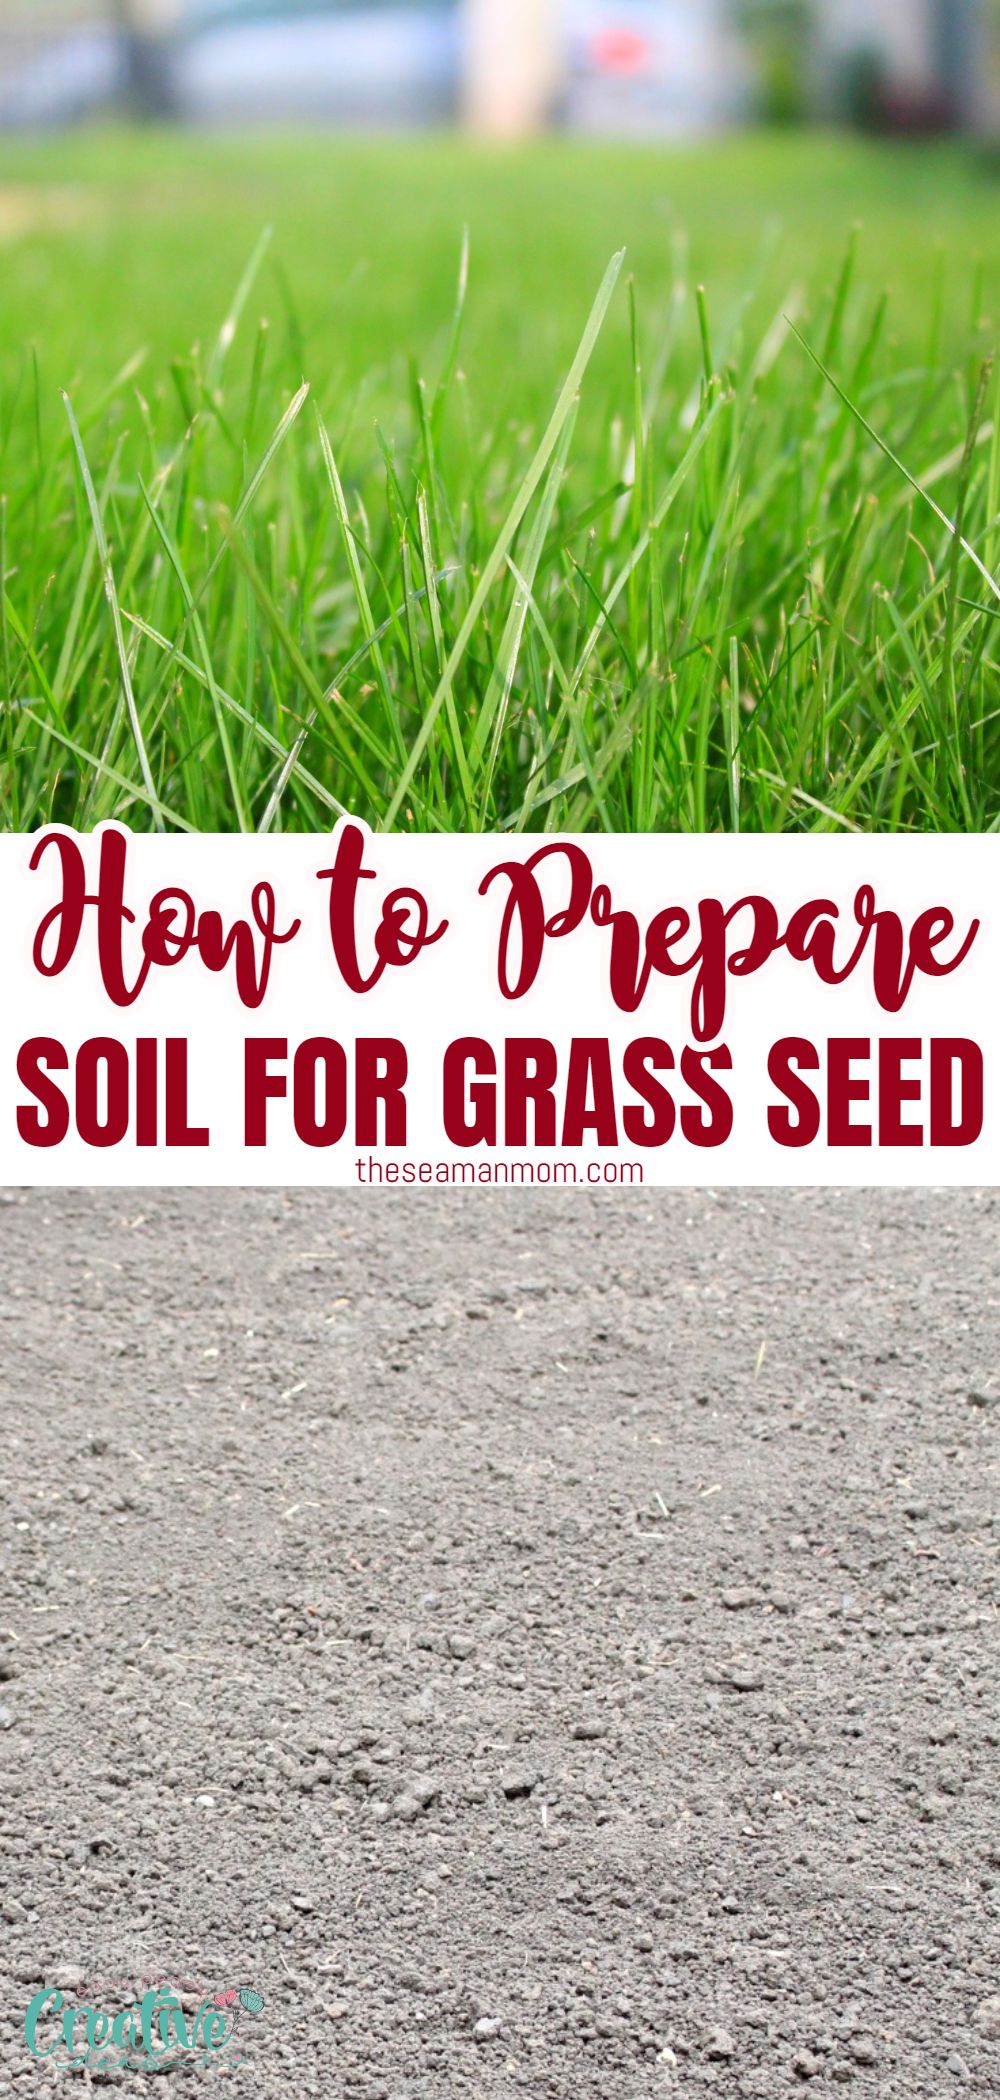 Growing a healthy lawn from scratch requires a healthy soil. Success or failure is strongly tied to the way you get the soil for grass ready for seeding. Here are some simple but necessary steps for preparing ground for turf.  via @petroneagu